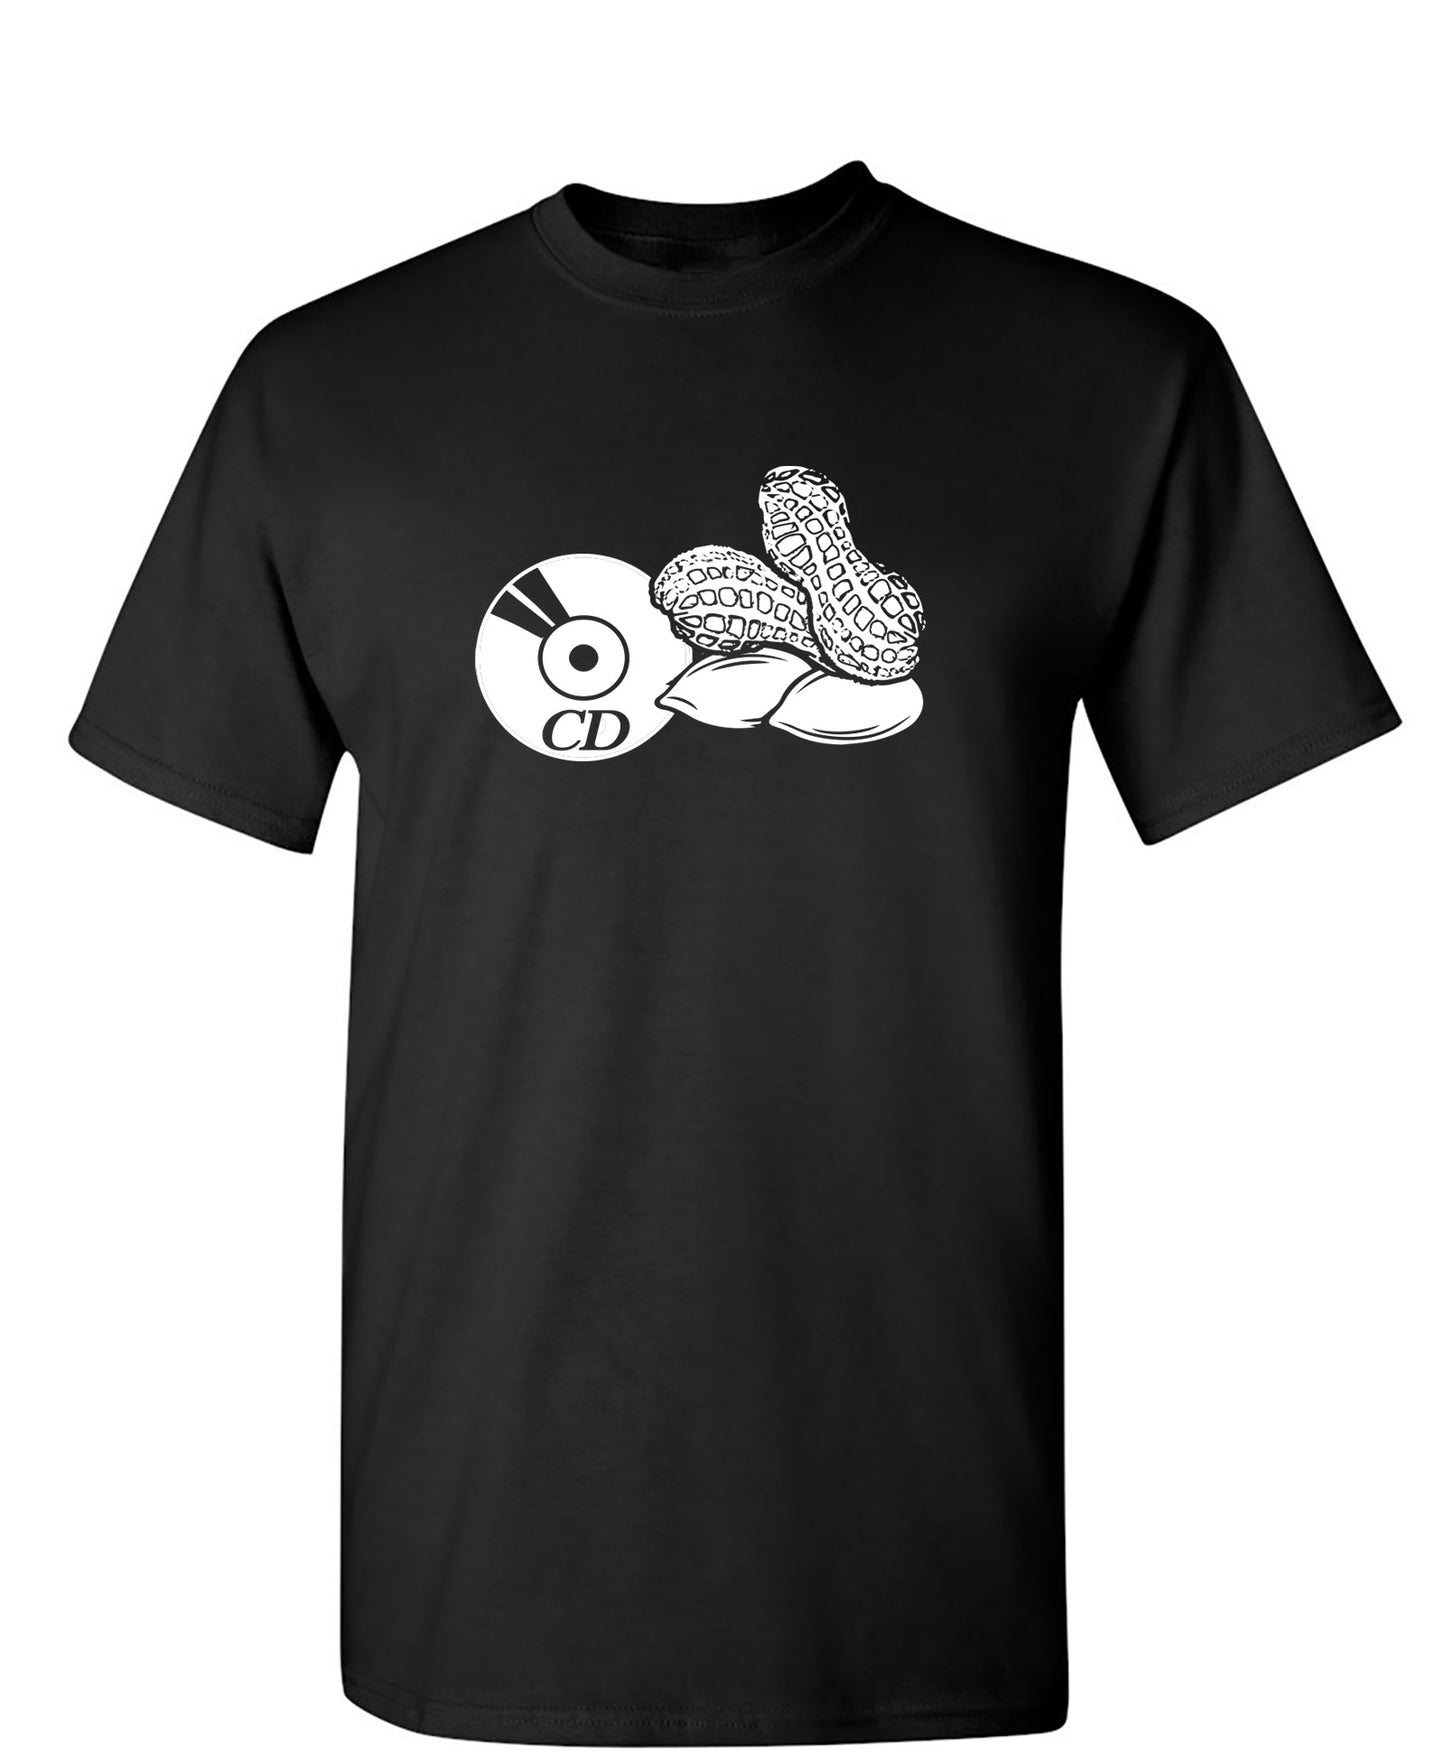 CD Nuts - Funny T Shirts & Graphic Tees